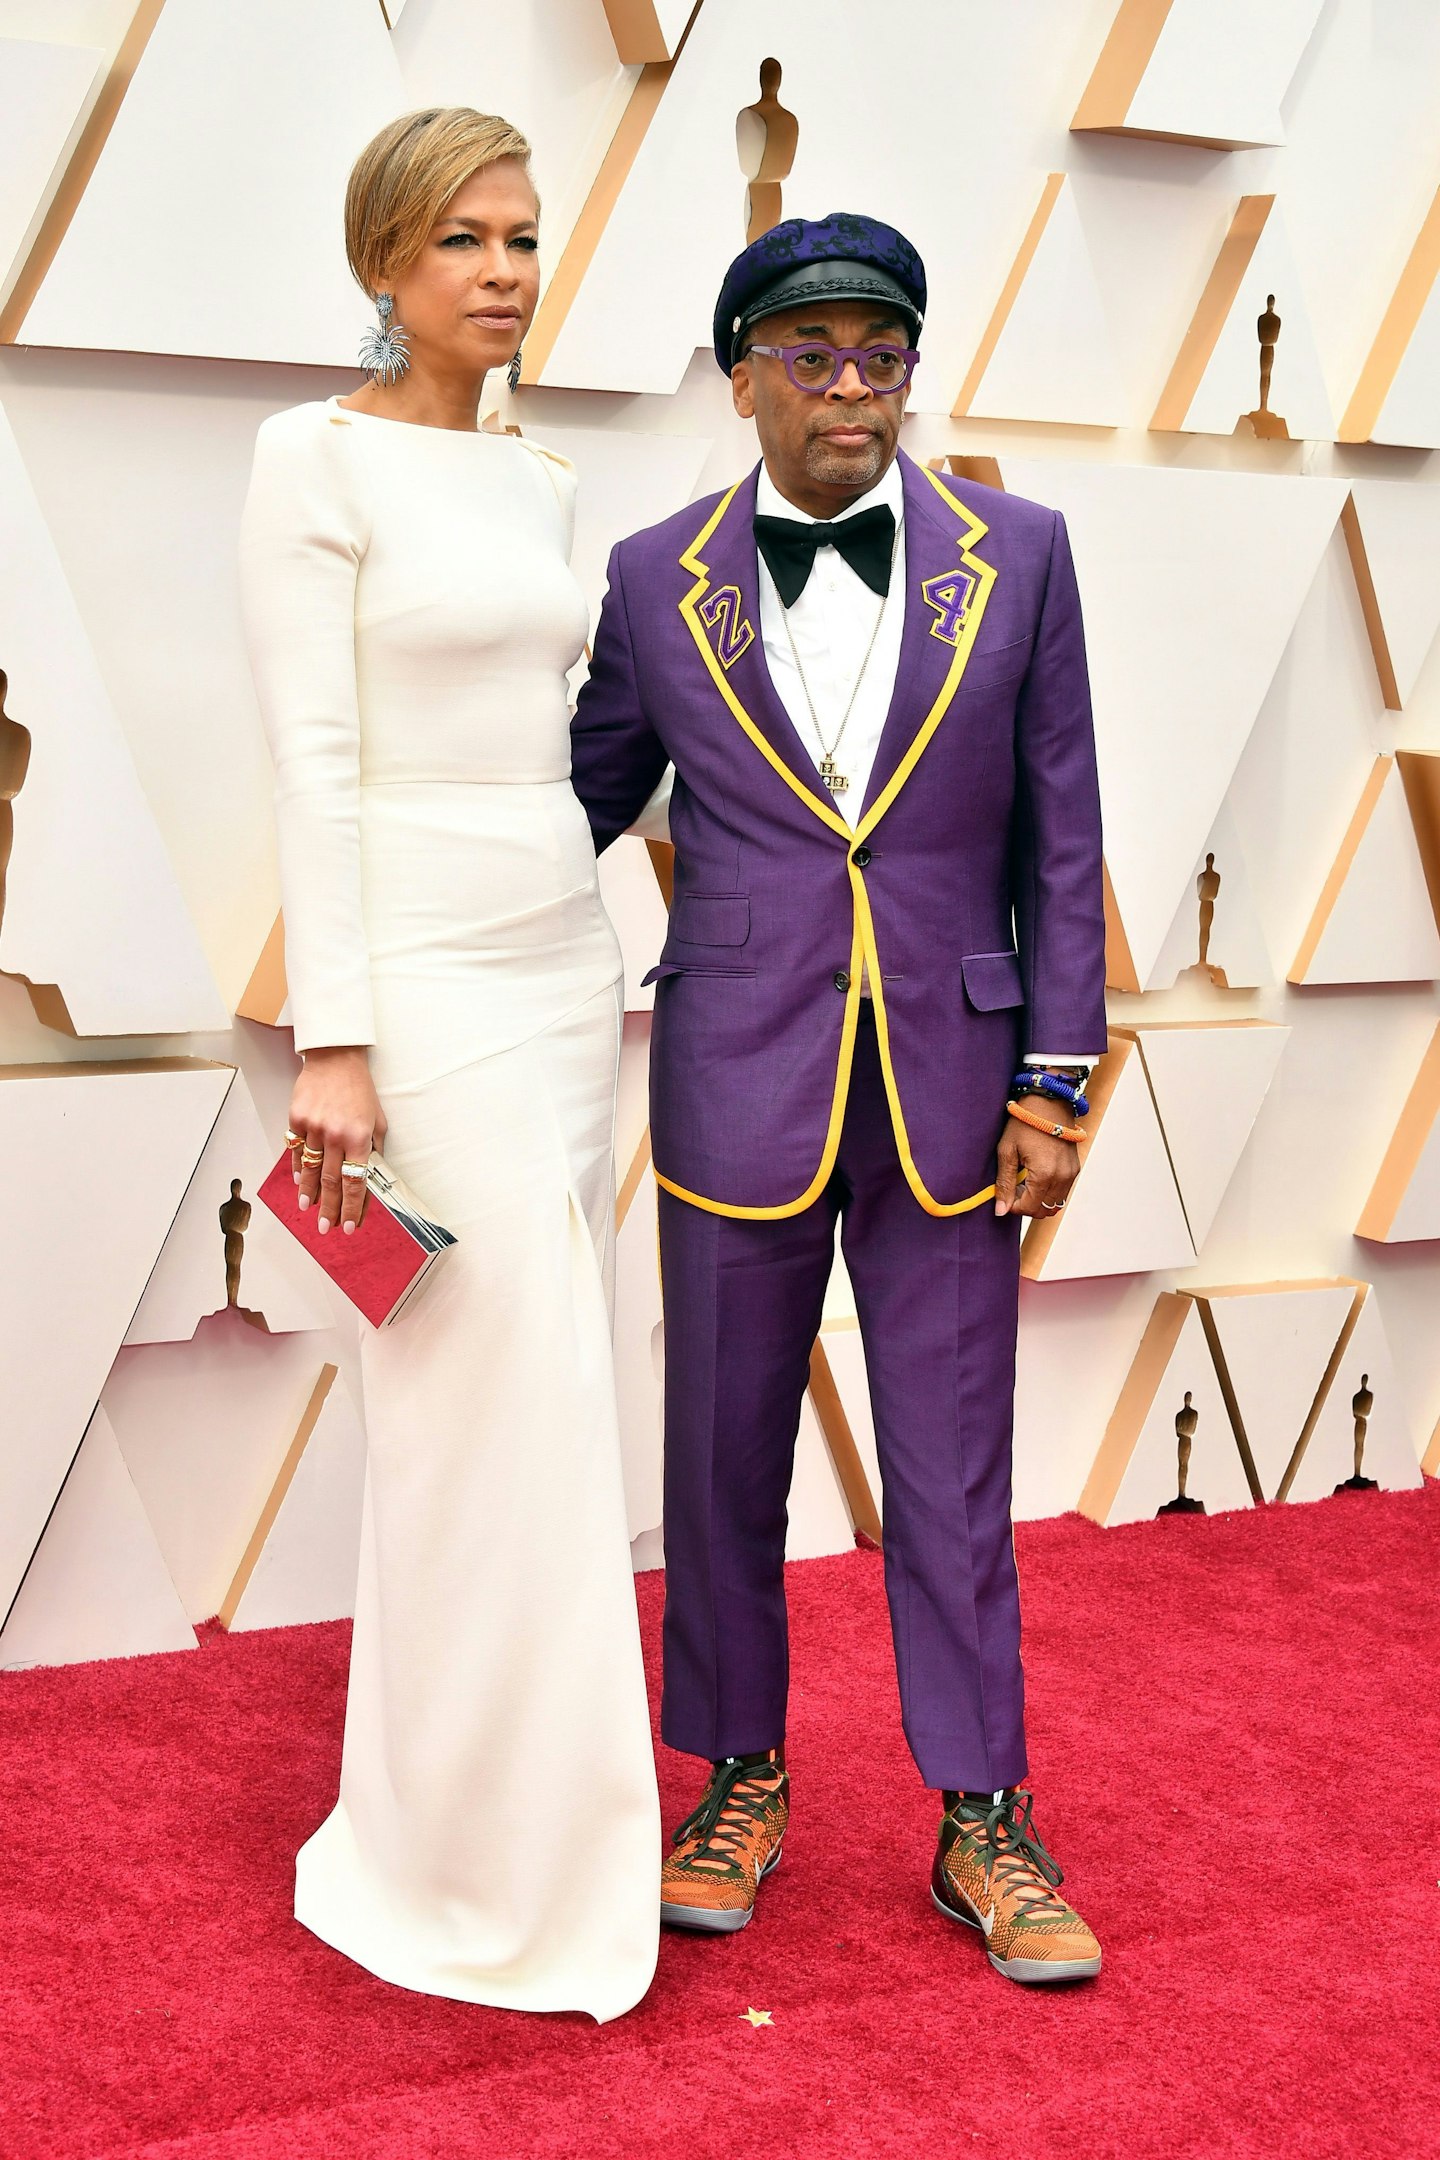 Spike Lee (who attended with his wife, Tonya Lewis Lee) wore a suit in tribute to Kobe Bryant